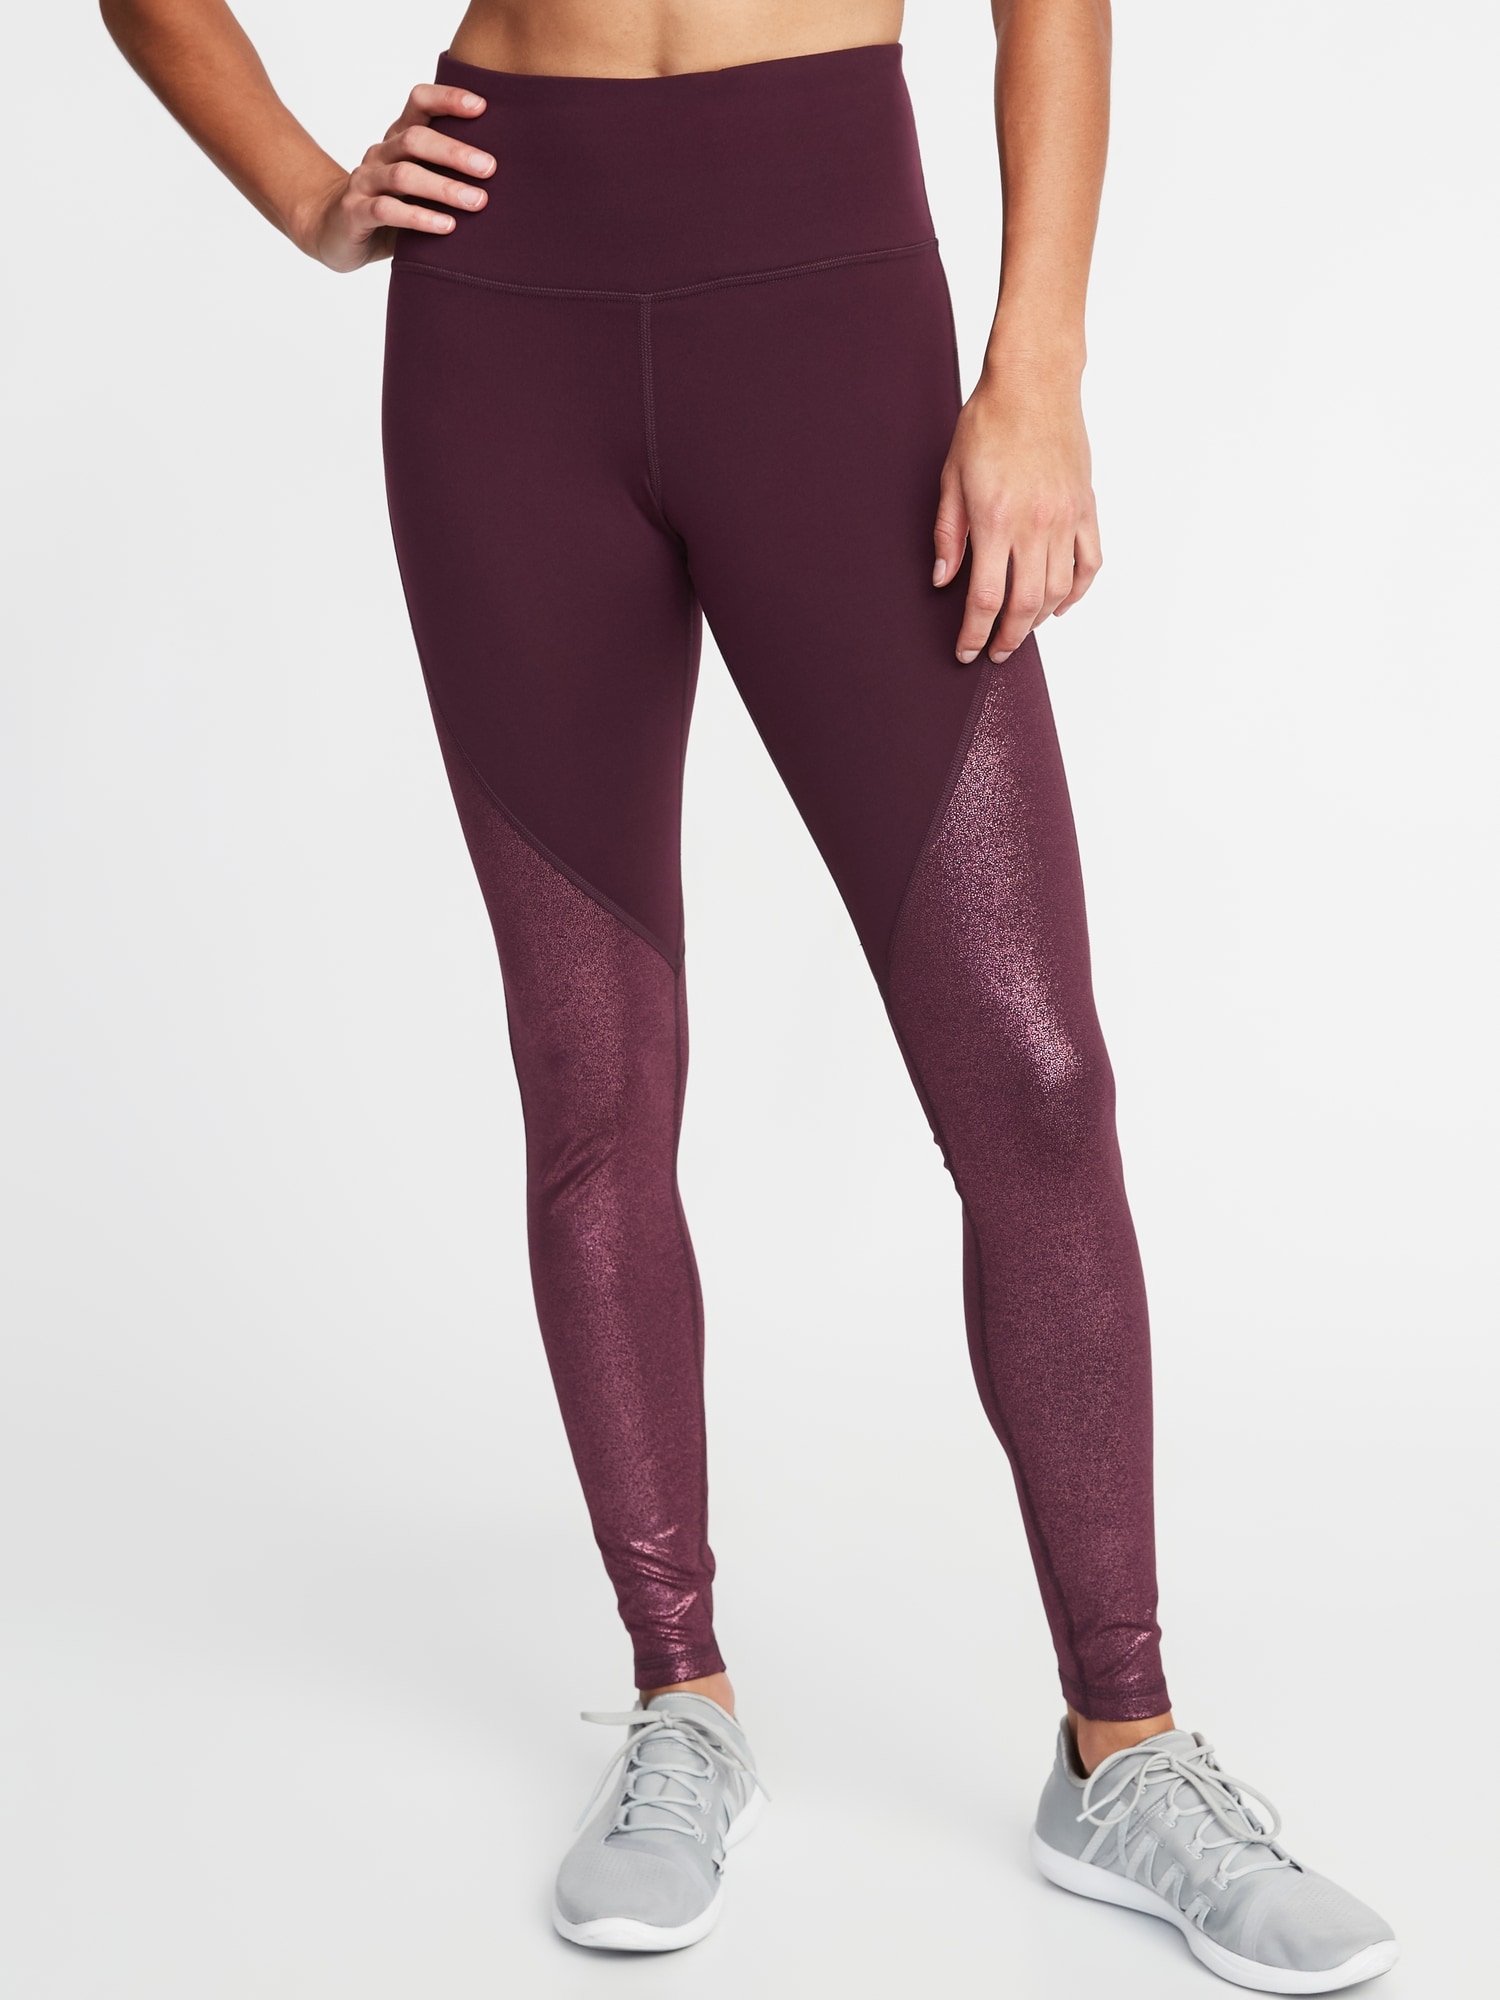 DEAR SPARKLE Thick High Waist Compression Slimming Leggings